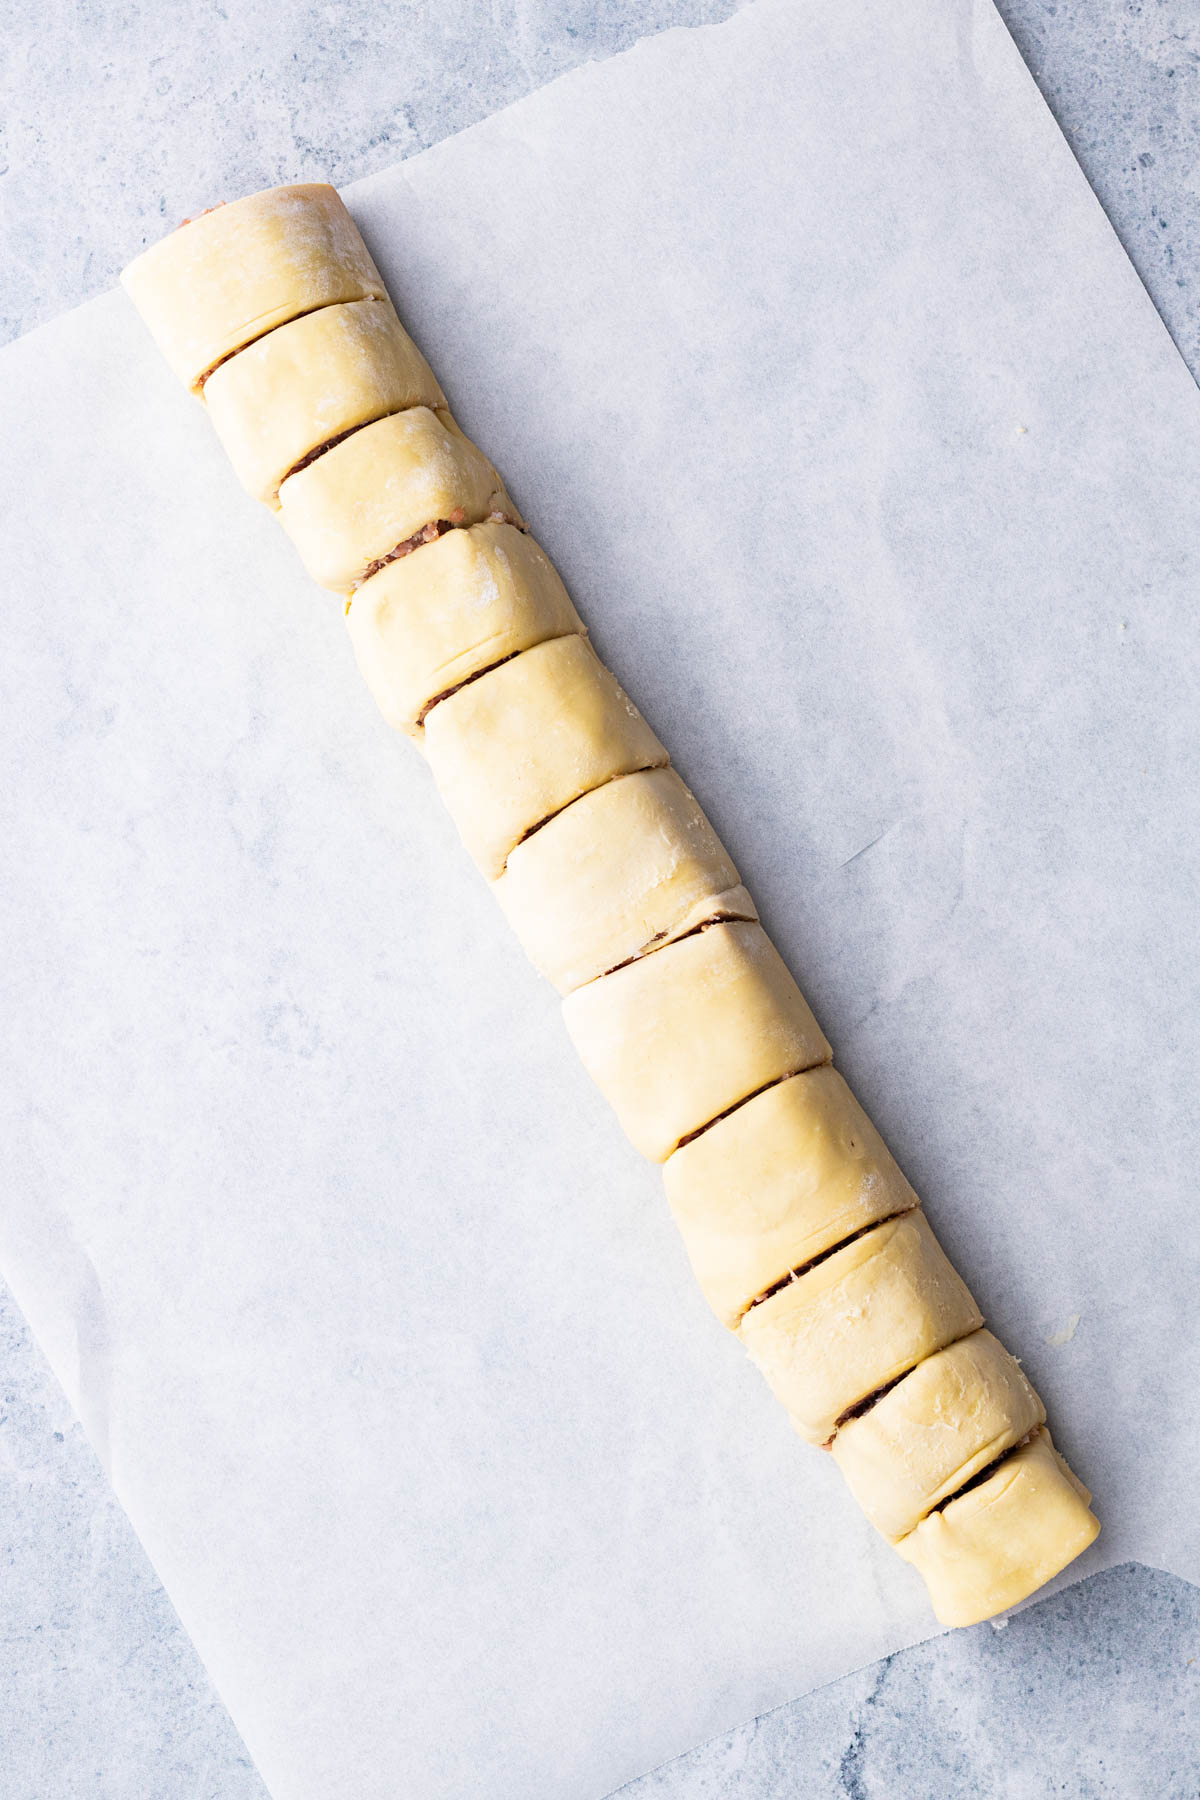 A rolled up log of pork sausage meat in puff pastry then cut into twelve equal pieces.